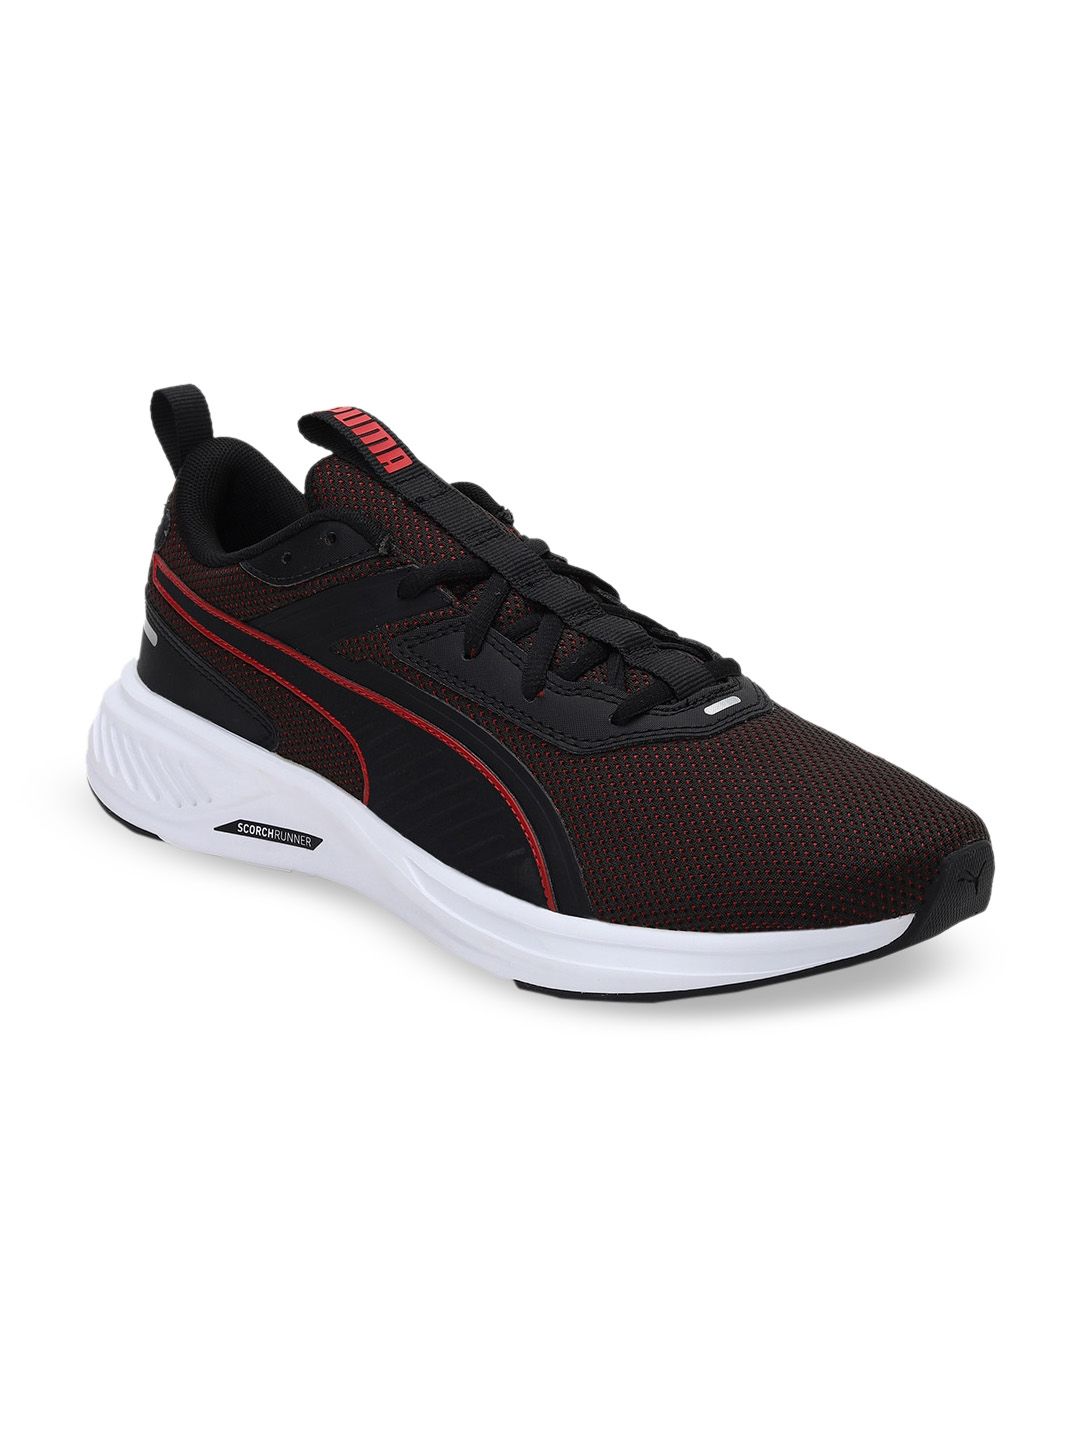 Puma Unisex Black Scorch Runner Running Sports Shoes Price in India